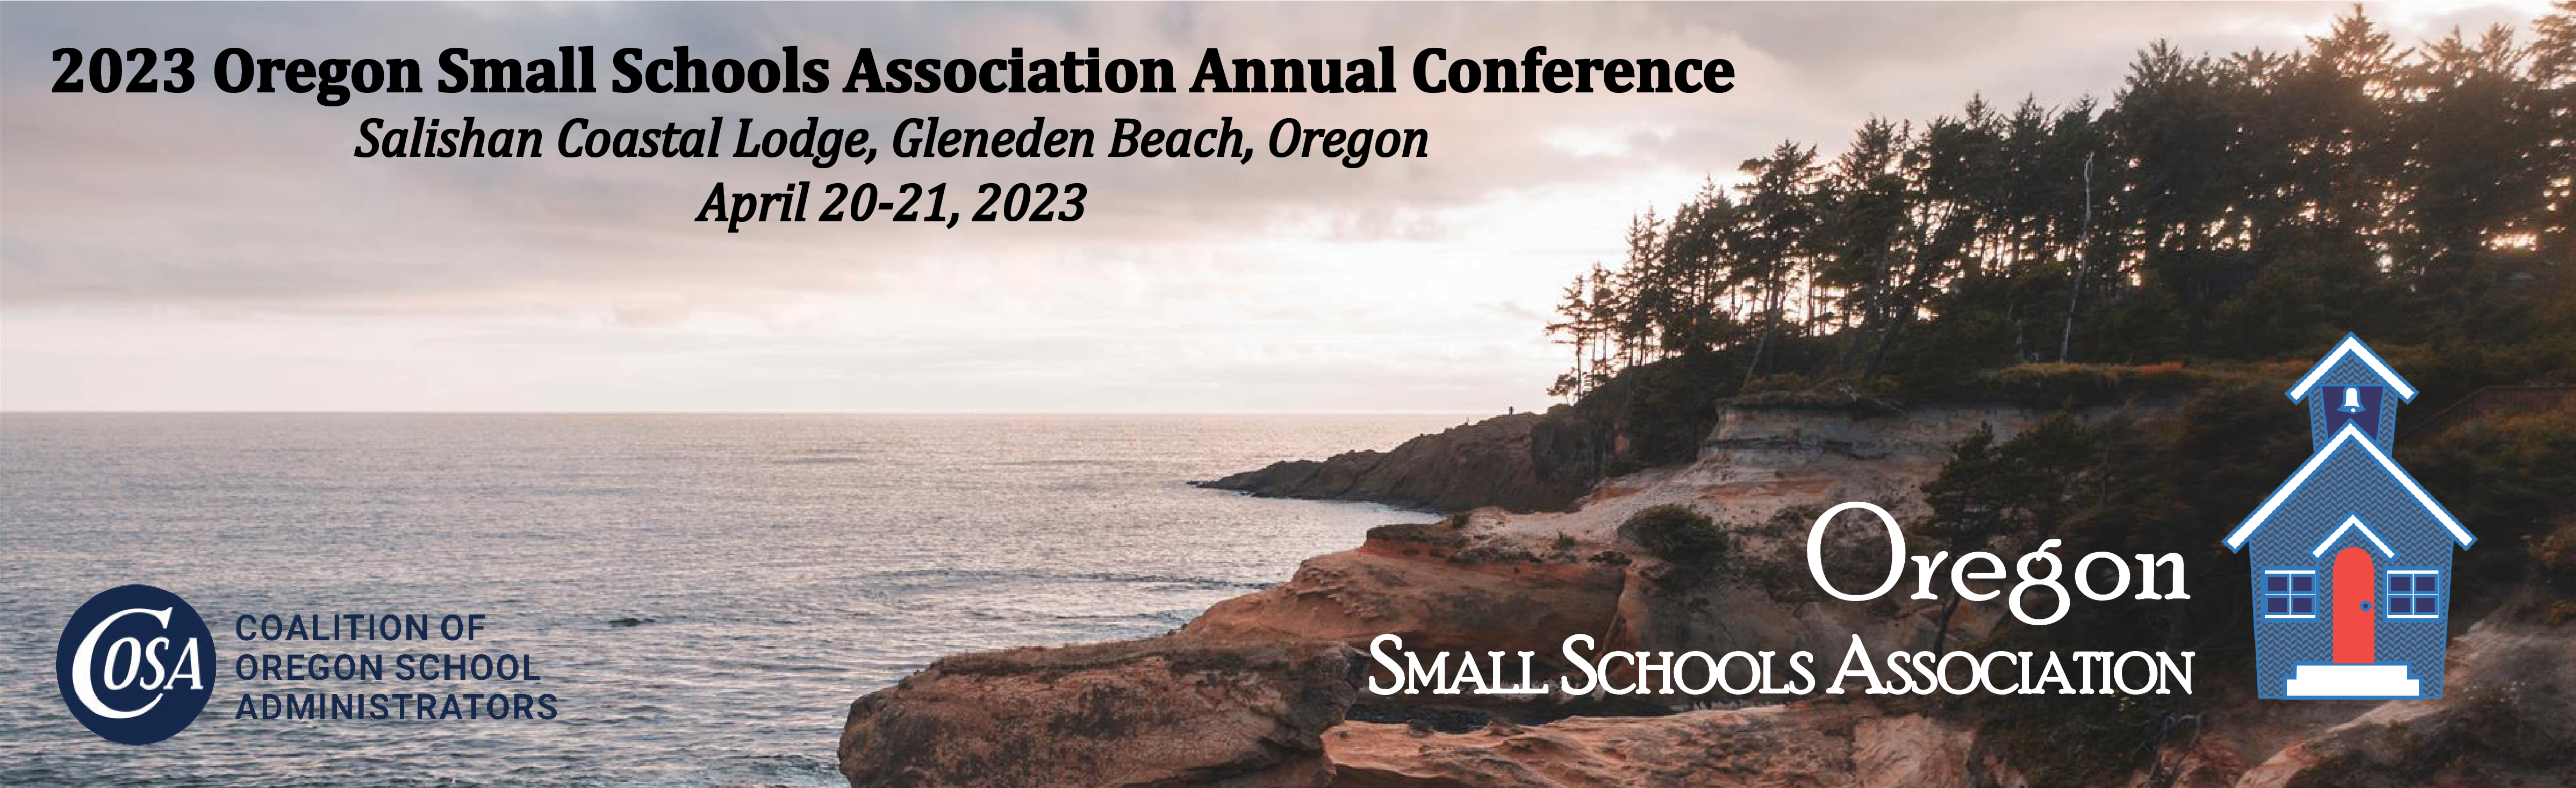 2023 Oregon Small Schools Association Annual Conference Coalition of